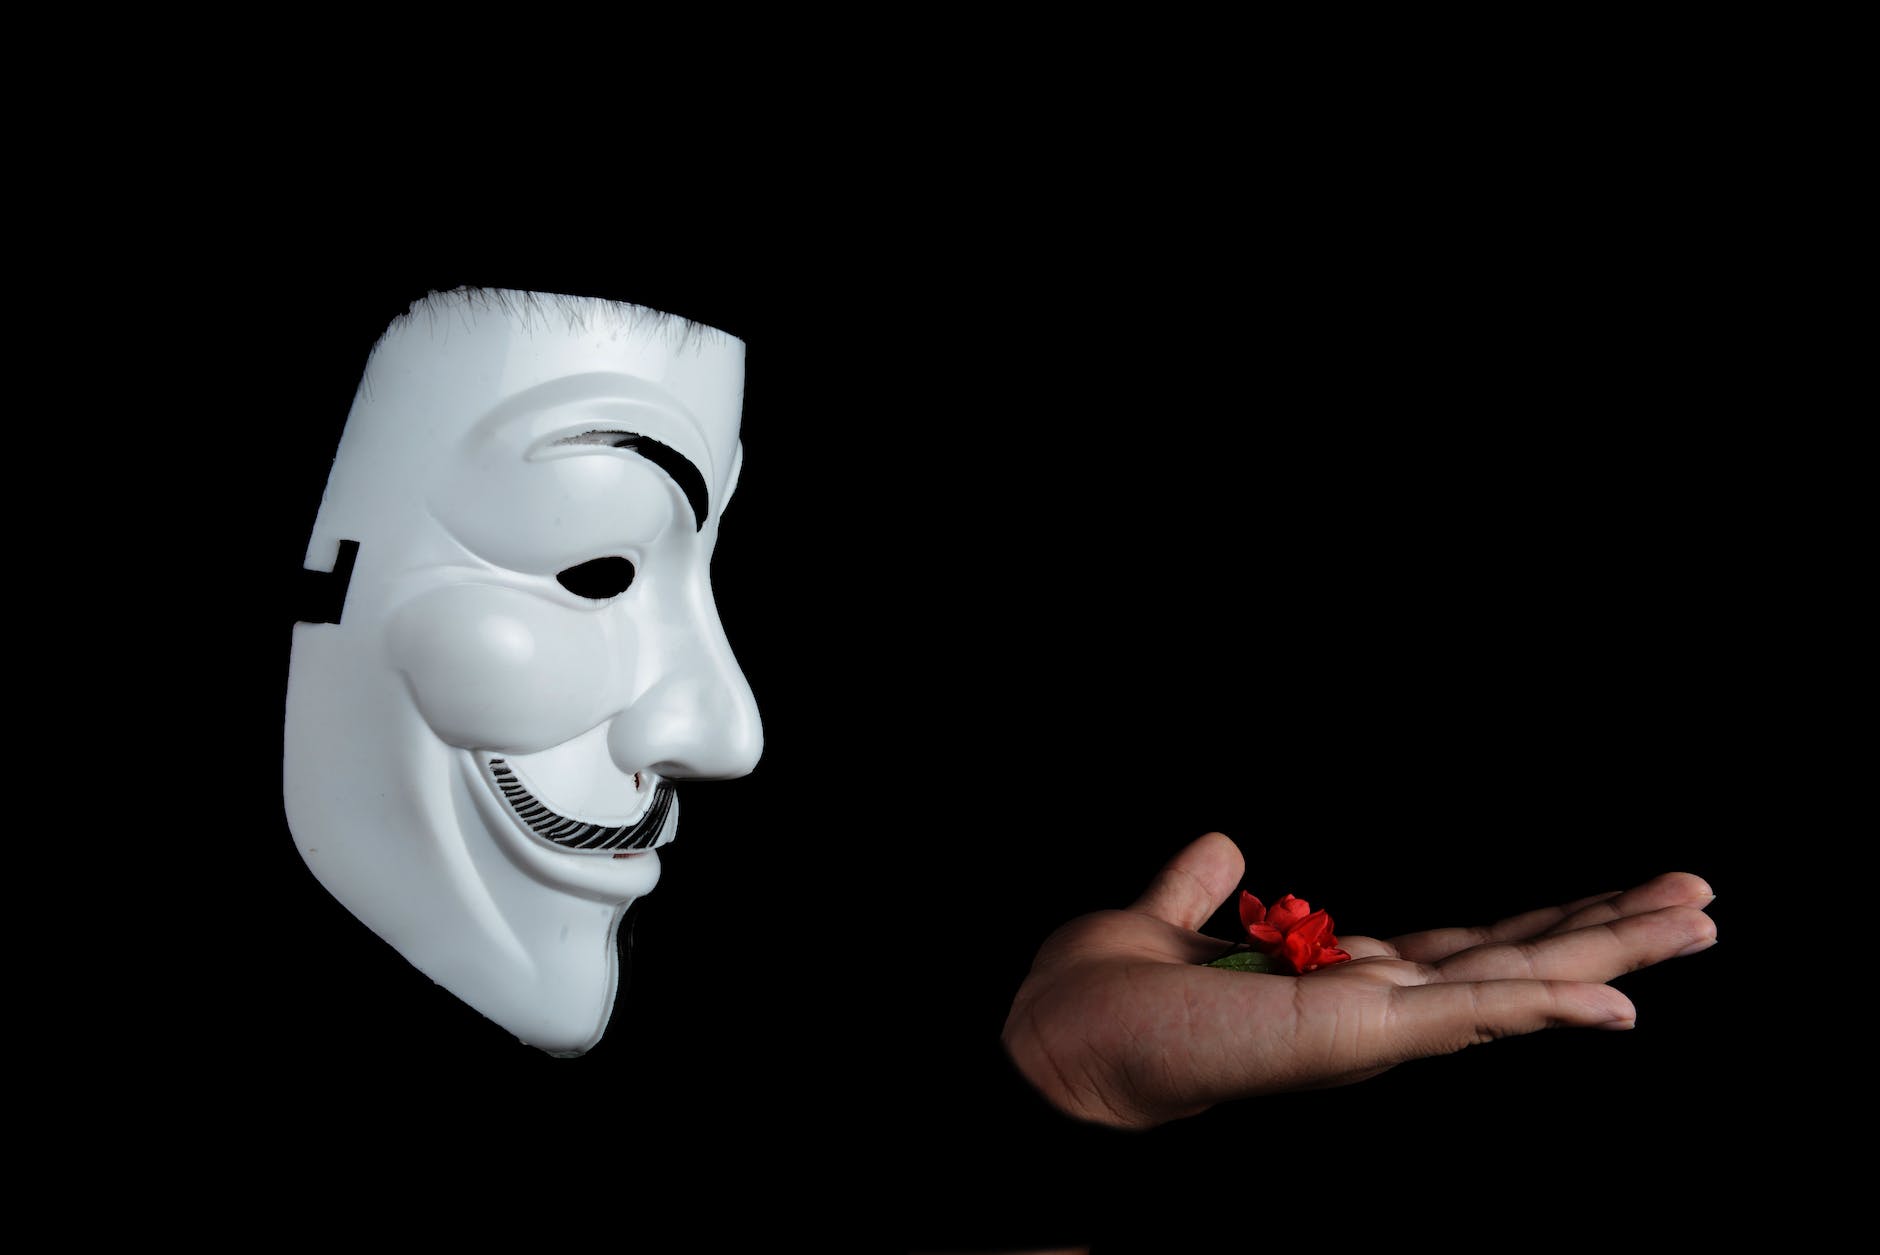 guy fawkes mask and red flower on hand